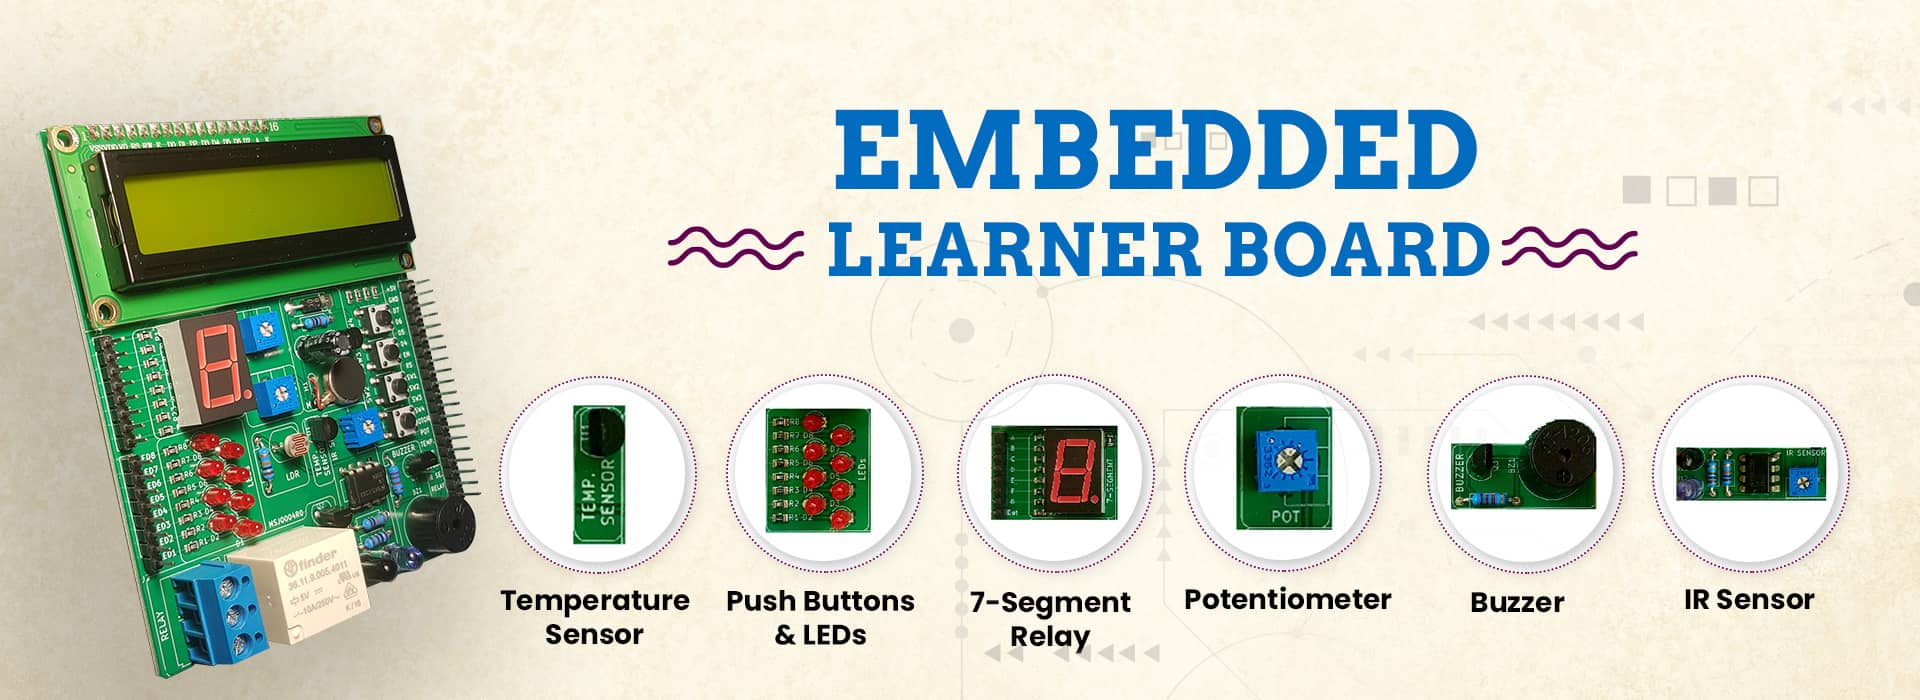 Benefits and Feature of Moonshot Jr Embedded Learner Board